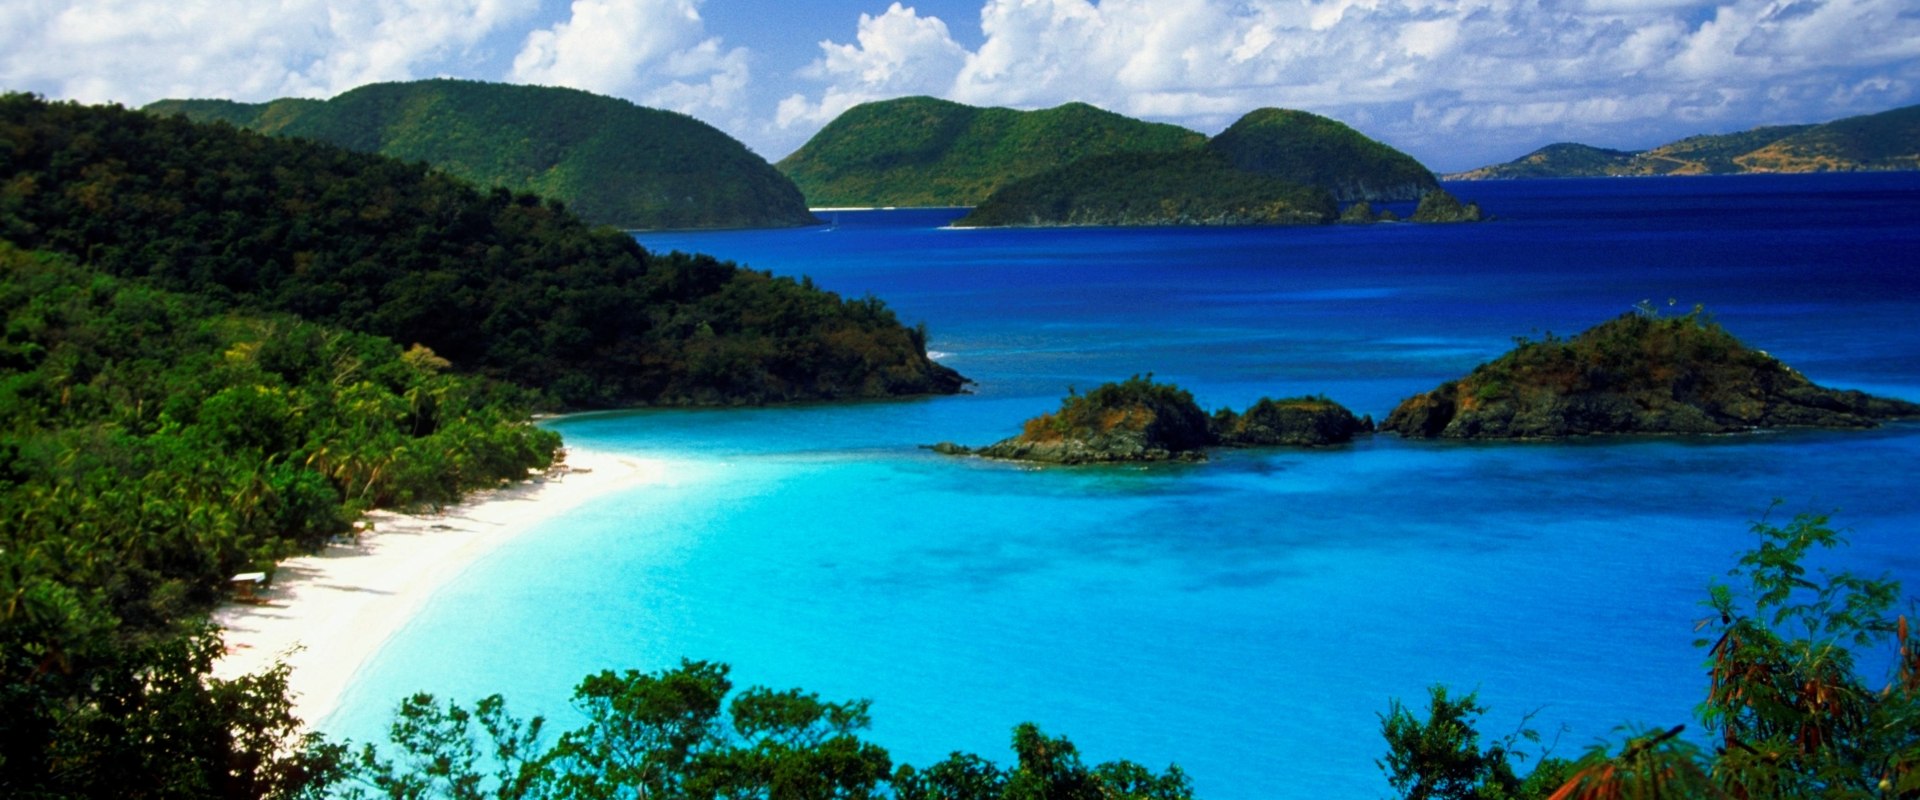 Where Can You Go in the US Virgin Islands Without a Passport?